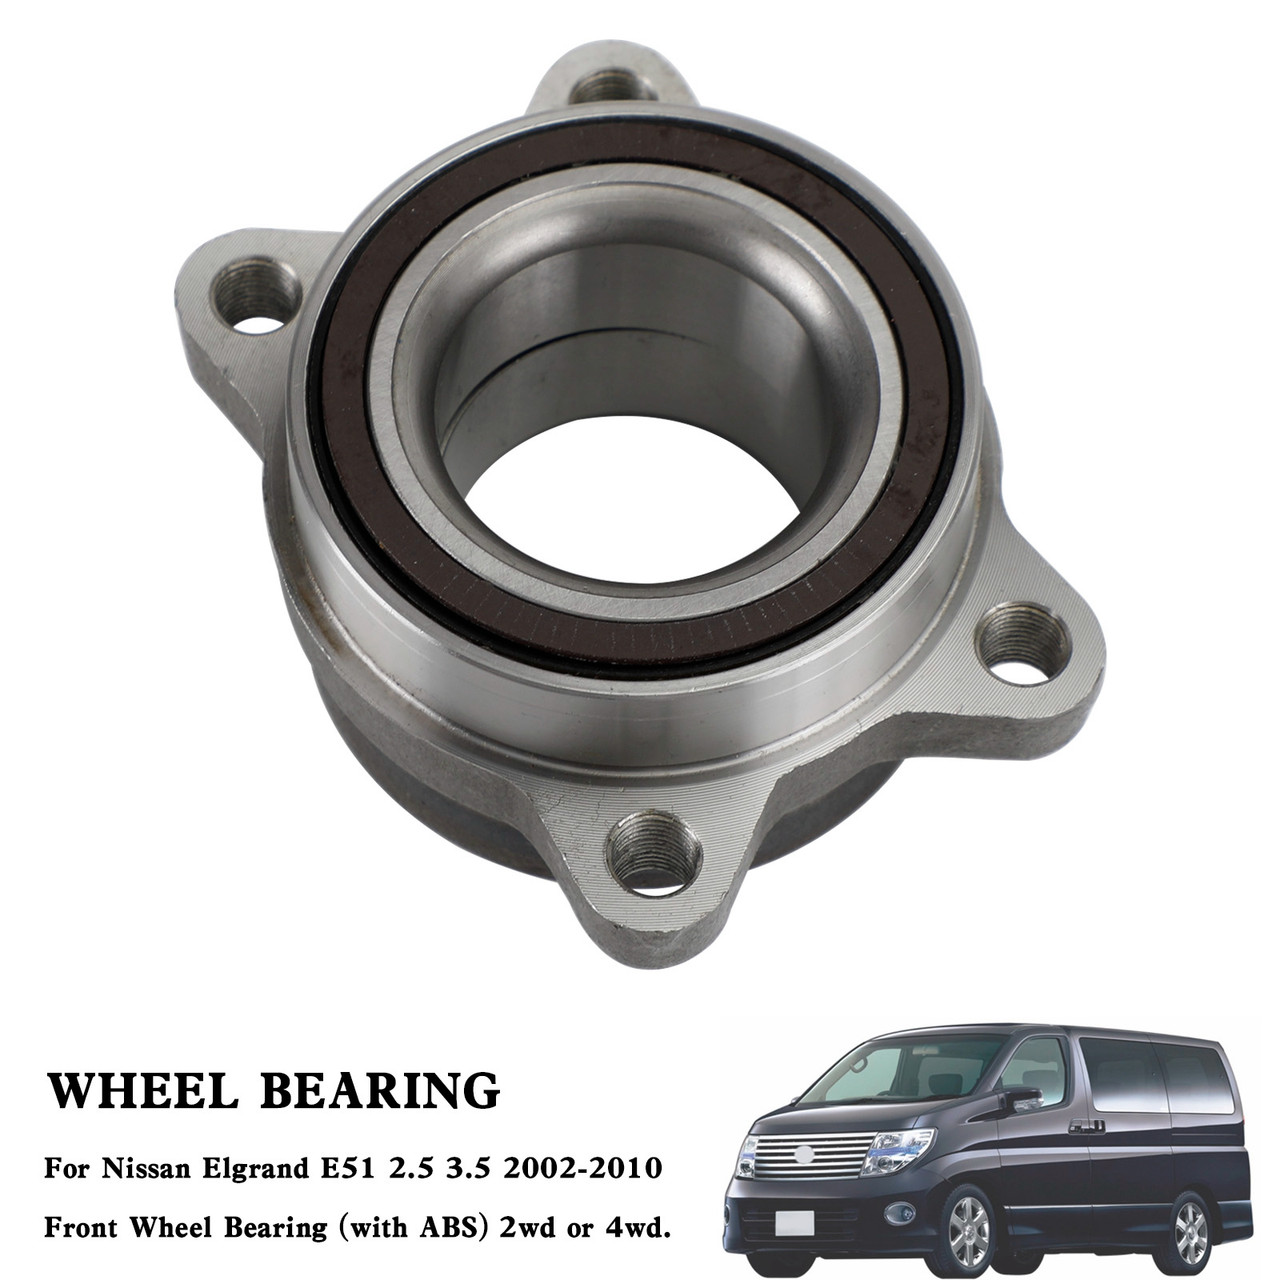 Front Wheel Bearing For Nissan Elgrand E51 2002-2010 2.5 3.5 With ABS 2WD 4WD